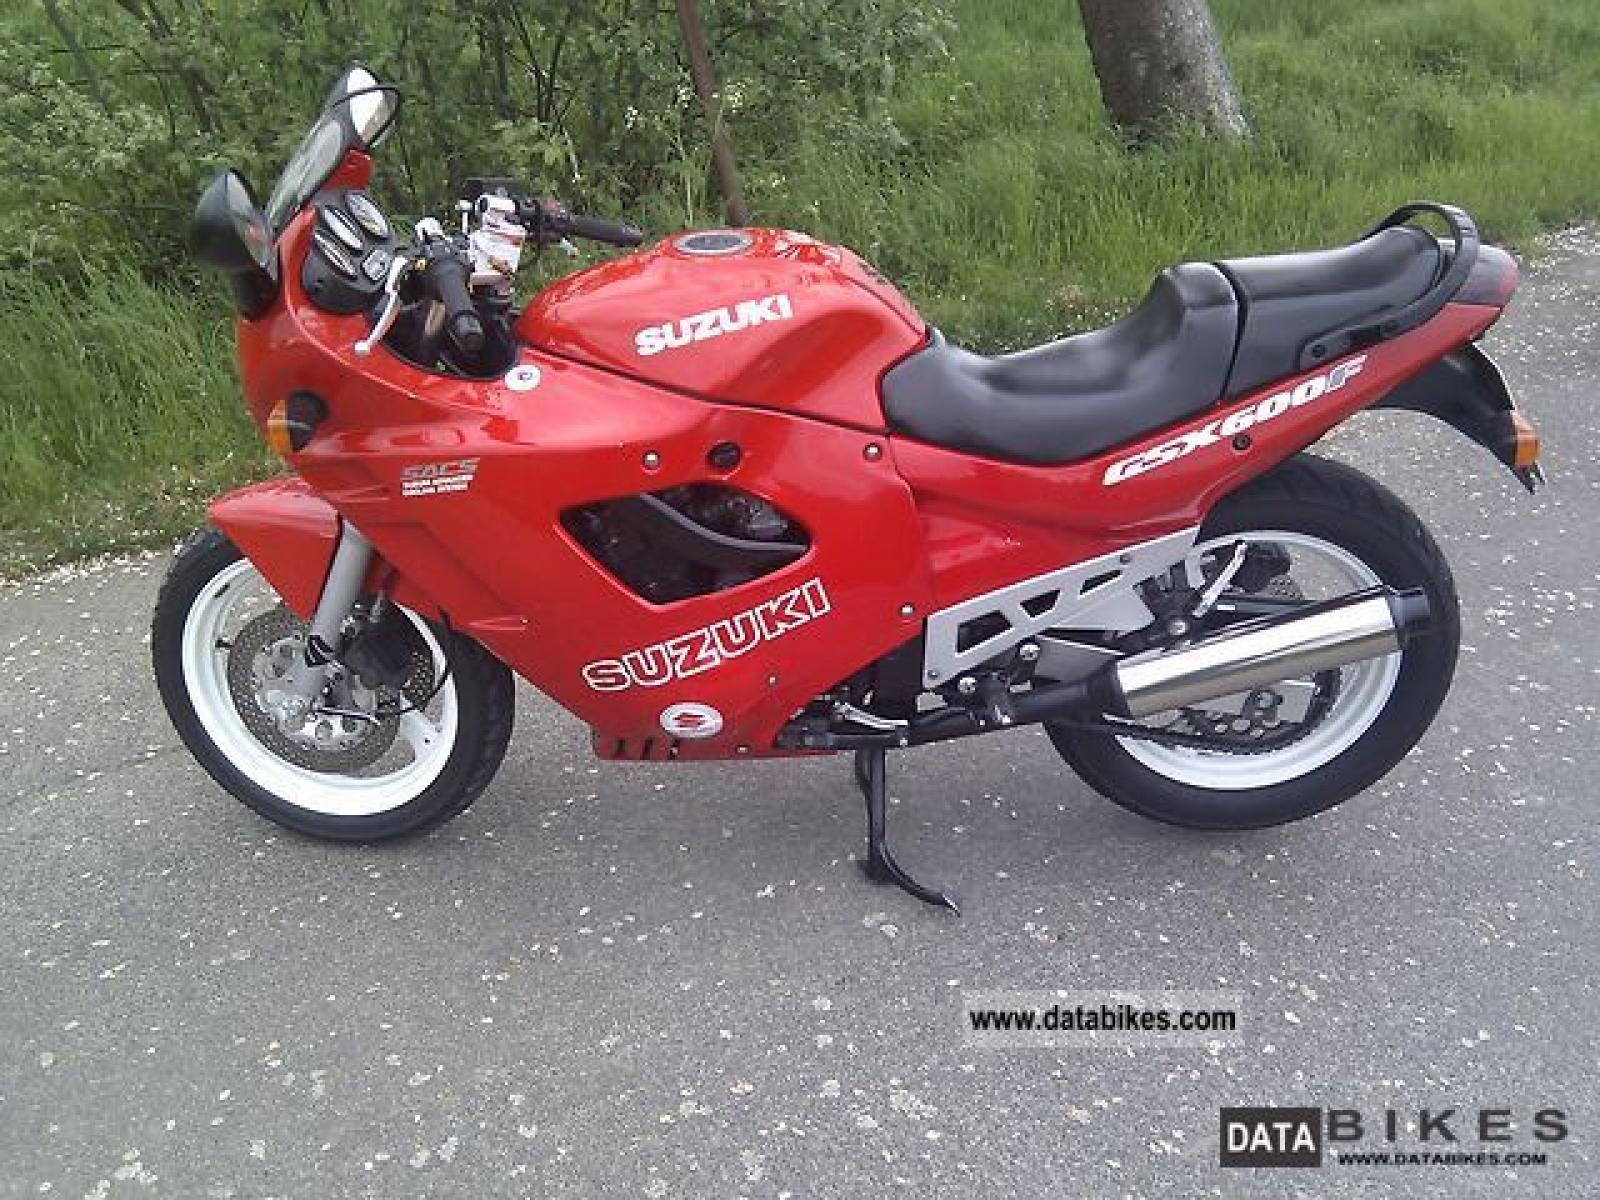 Review of Suzuki GSX 600 F 1990 pictures, live photos